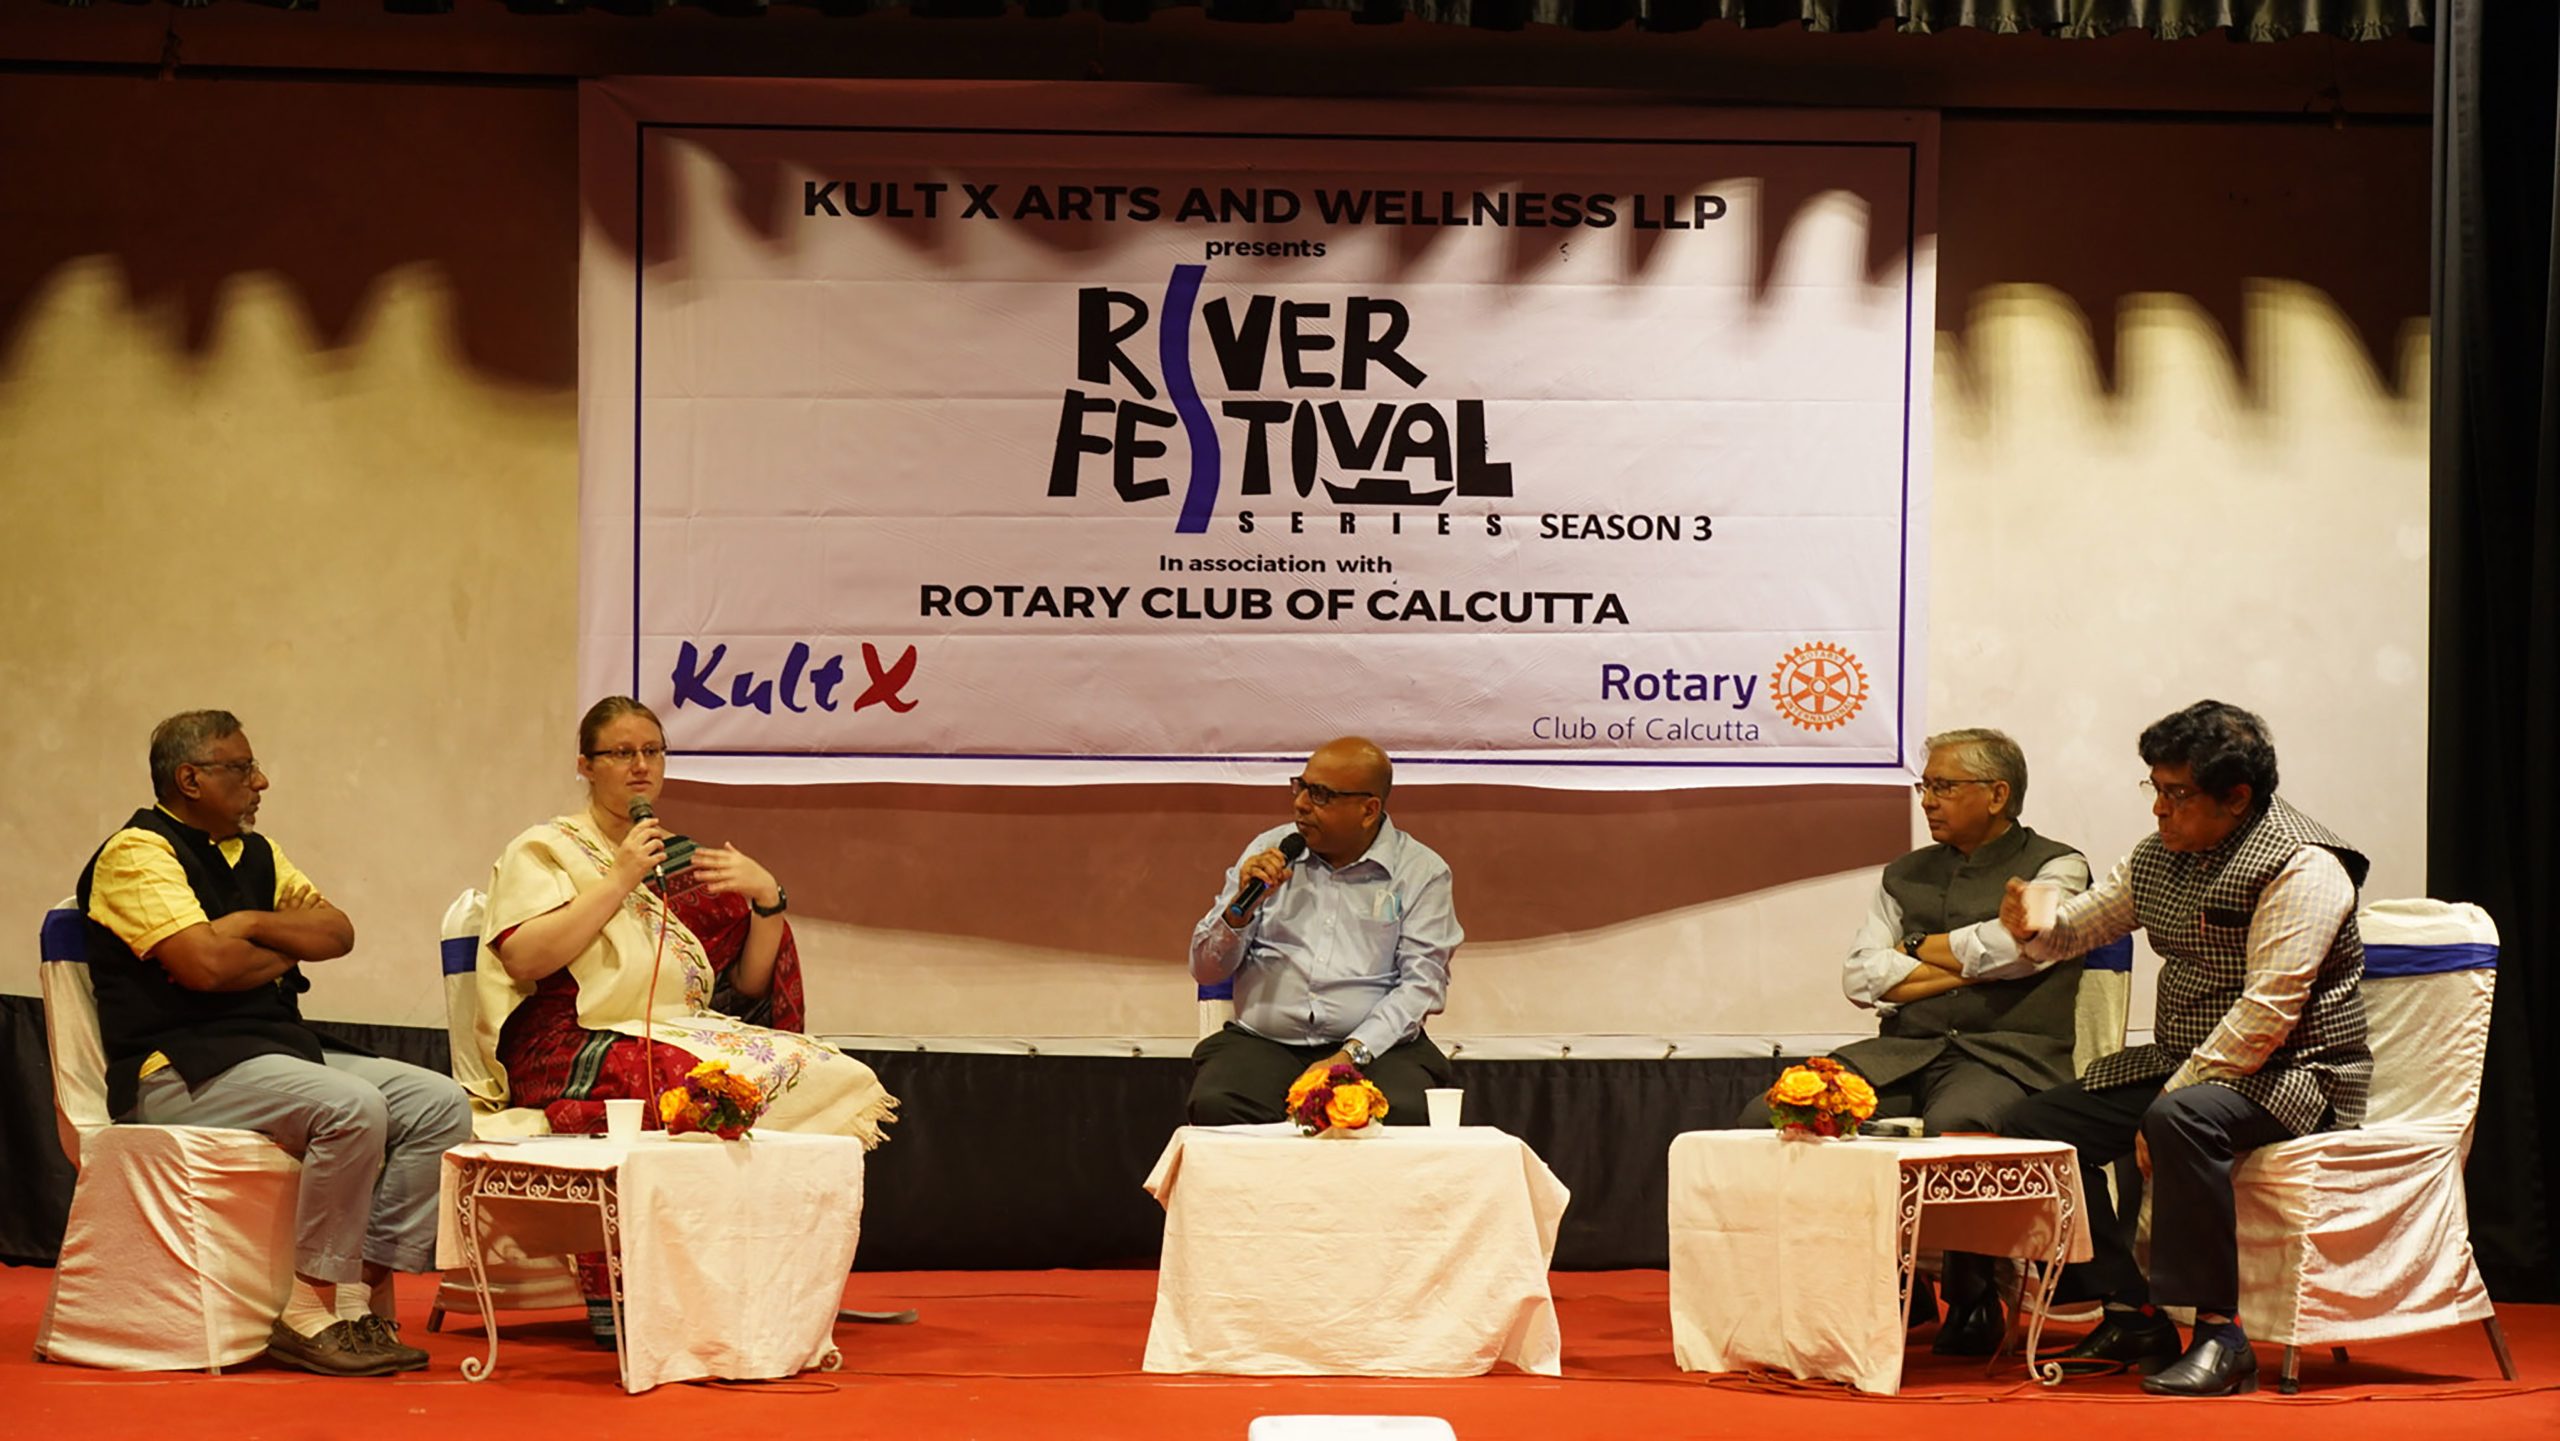 (L - R): Mr Mudar Patherya, Social activist and writer; Ms Chelsea McGill, Anthropologist, Historian & CEO of Immersive Trails; Mr Sumit Ray, The moderator; Mr Partha Ranjan Das, Conservation Architect, Urban Designer & Member, West Bengal Heritage Commission and Centre for Archaeological Studies and Training (CAST) & Mr Gautam Chakraborti, former Adviser Security, Syamaprasad Mookerjee Port (Kolkata Port) & Hony Heritage Adviser Port at the Panel Discussion of River Festival this year.